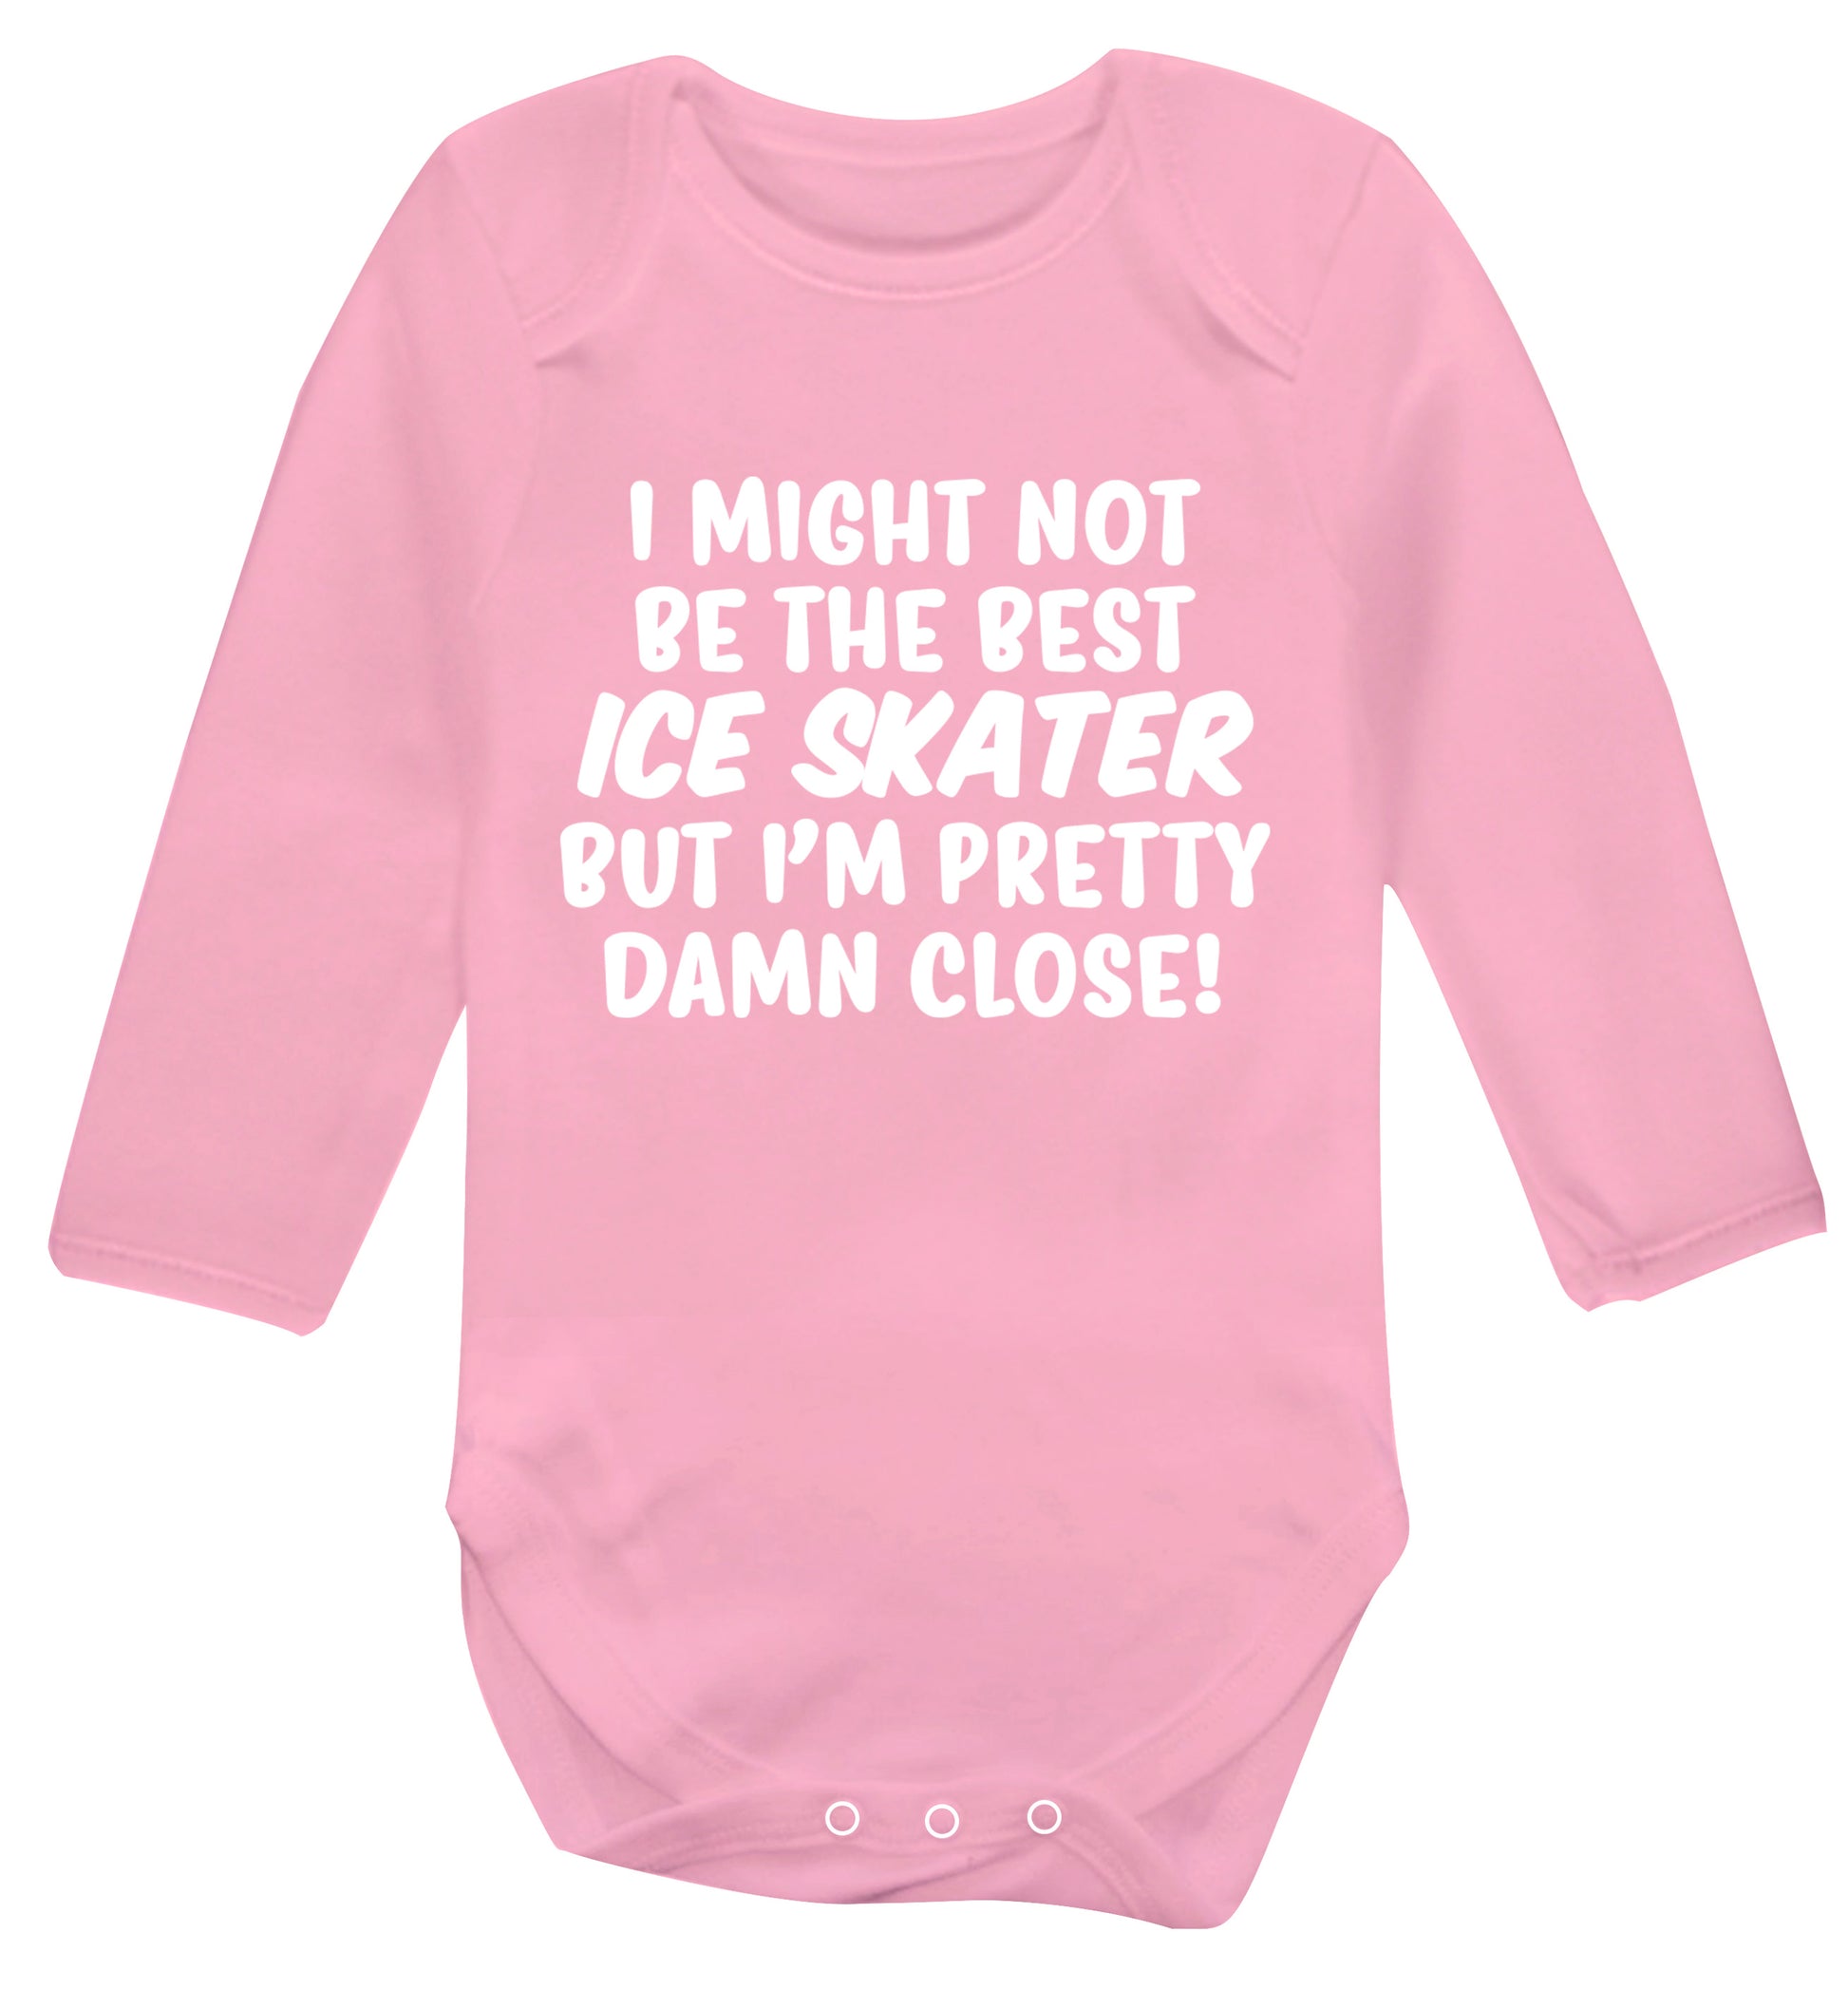 I might not be the best ice skater but I'm pretty damn close! Baby Vest long sleeved pale pink 6-12 months